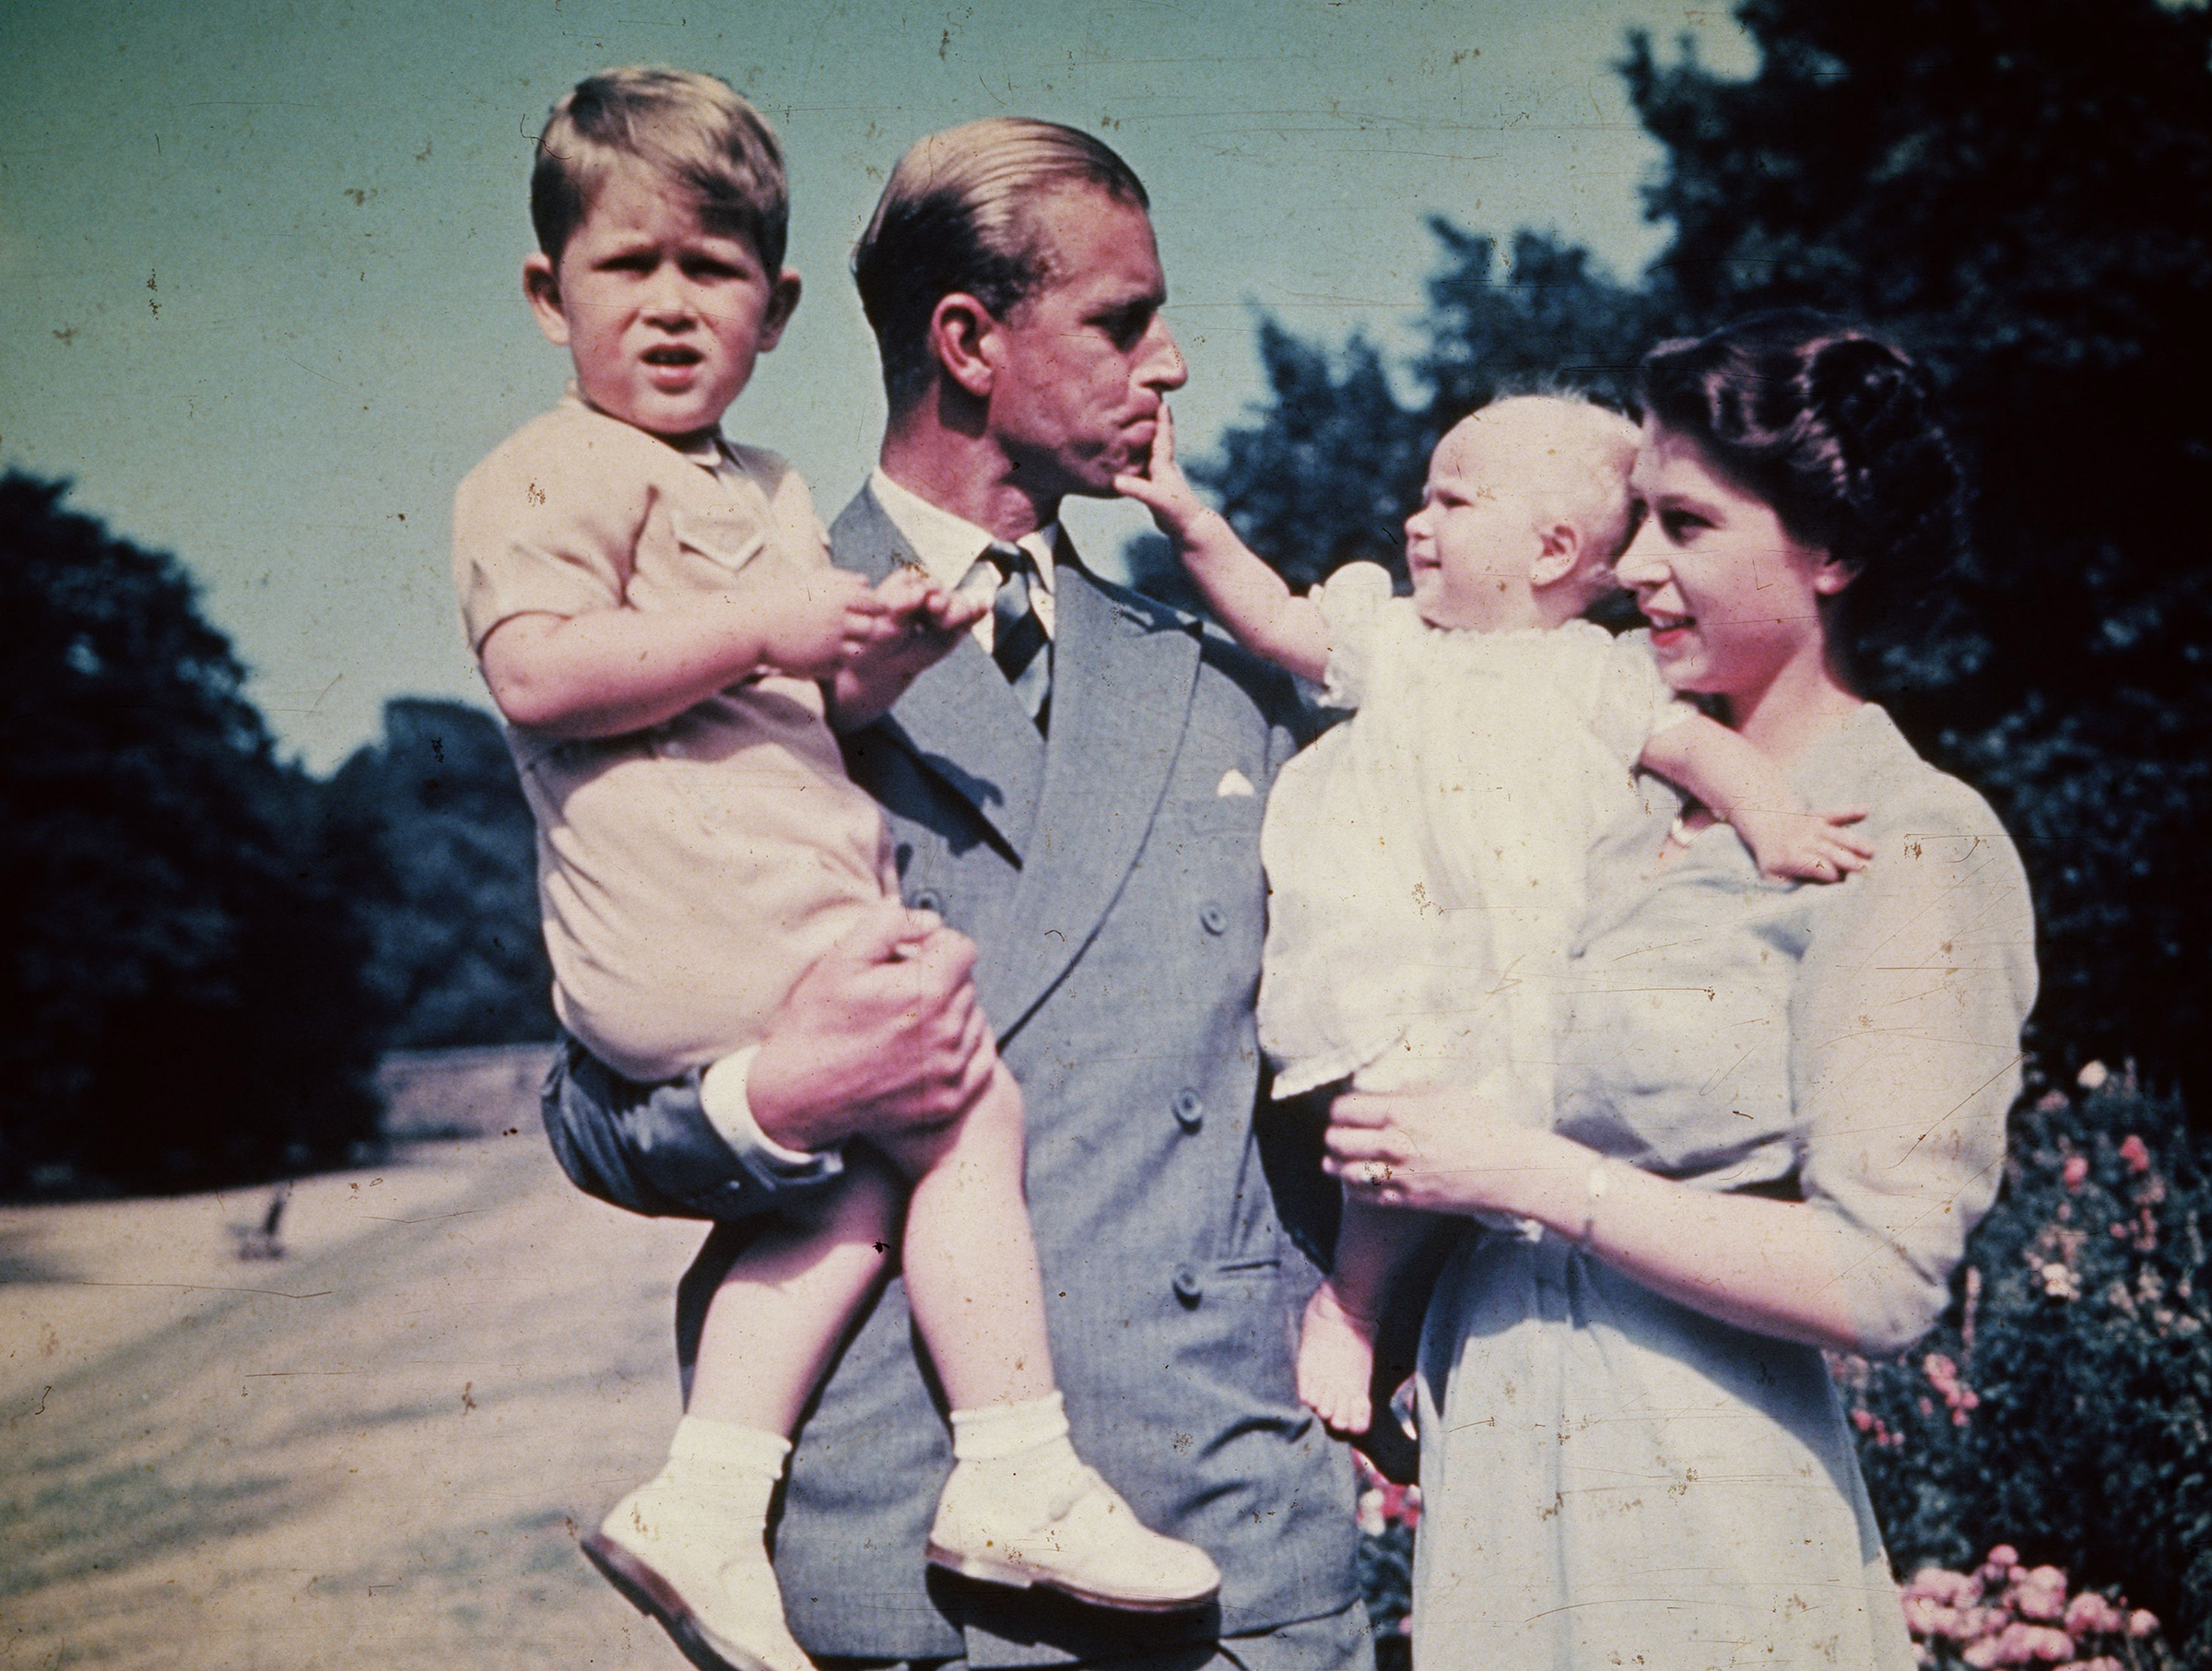 The Duke of Edinburgh and Princess Elizabeth hold their children, Prince Charles and Princess Anne, Aug. 1951. (Keystone/Hulton Archive/Getty Images)